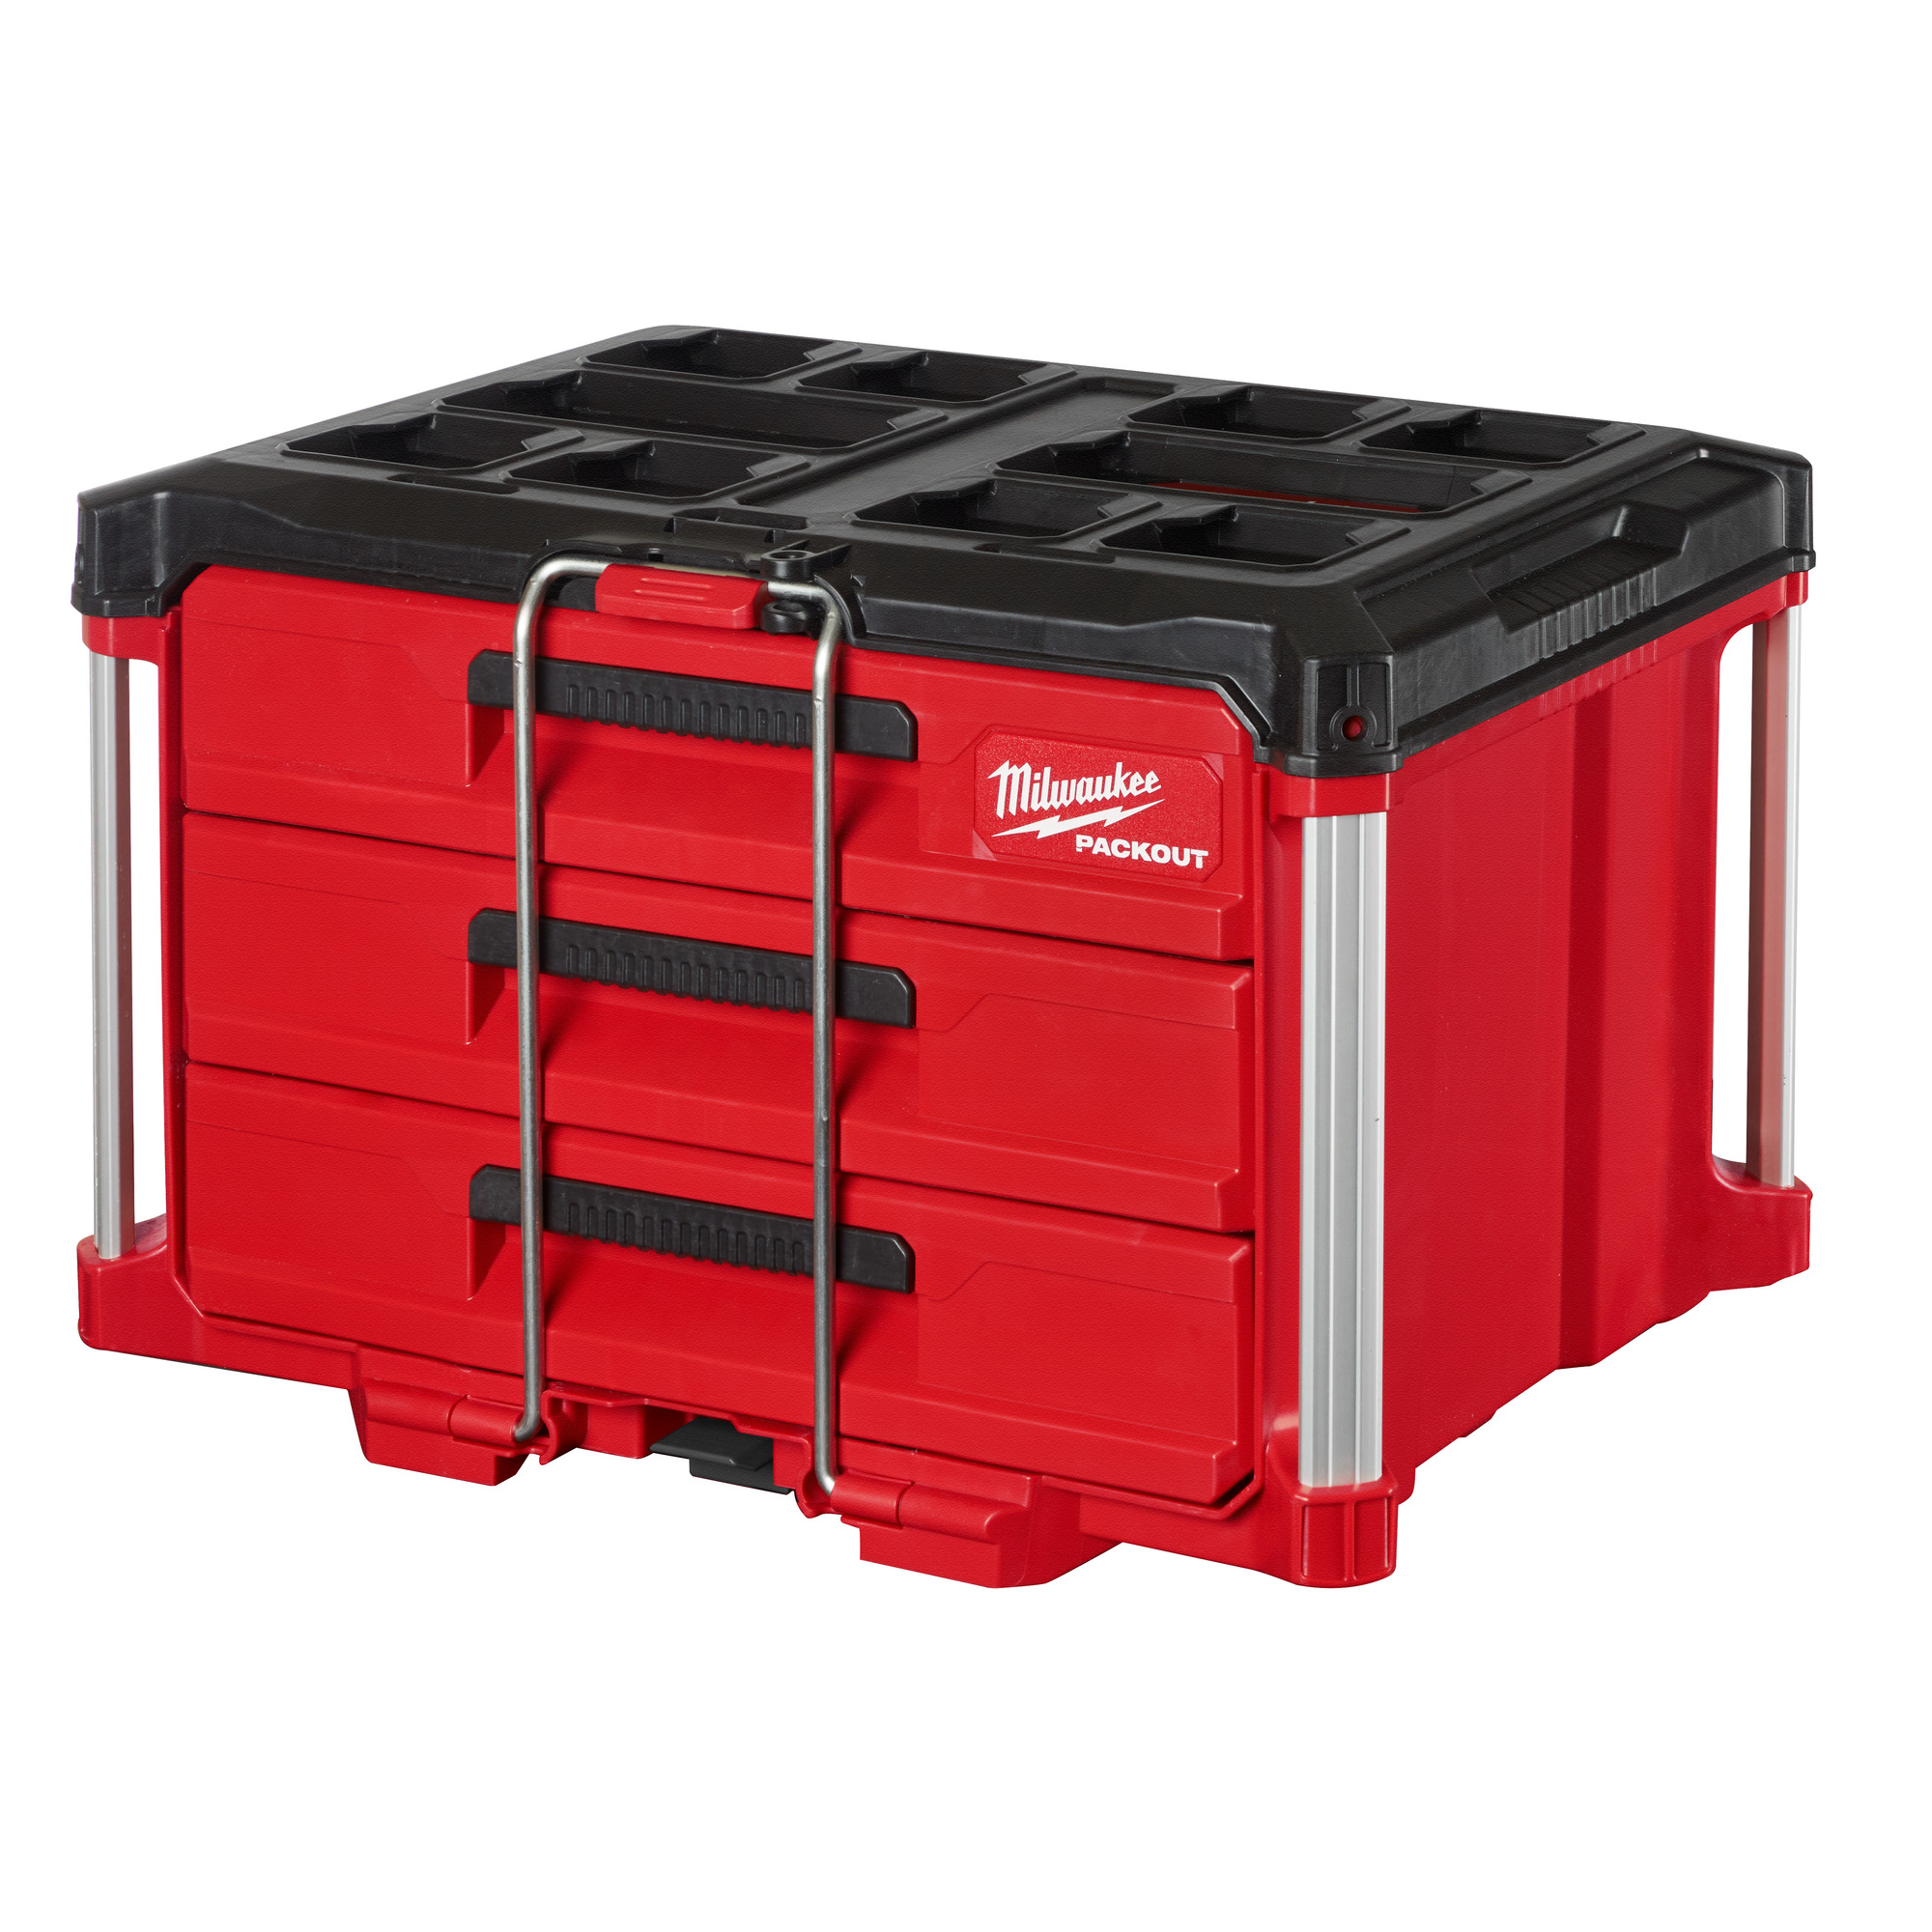 Milwaukee Packout 3-Drawer Tool Box, 50lb. Capacity, Lockable, Model 48-22-8443